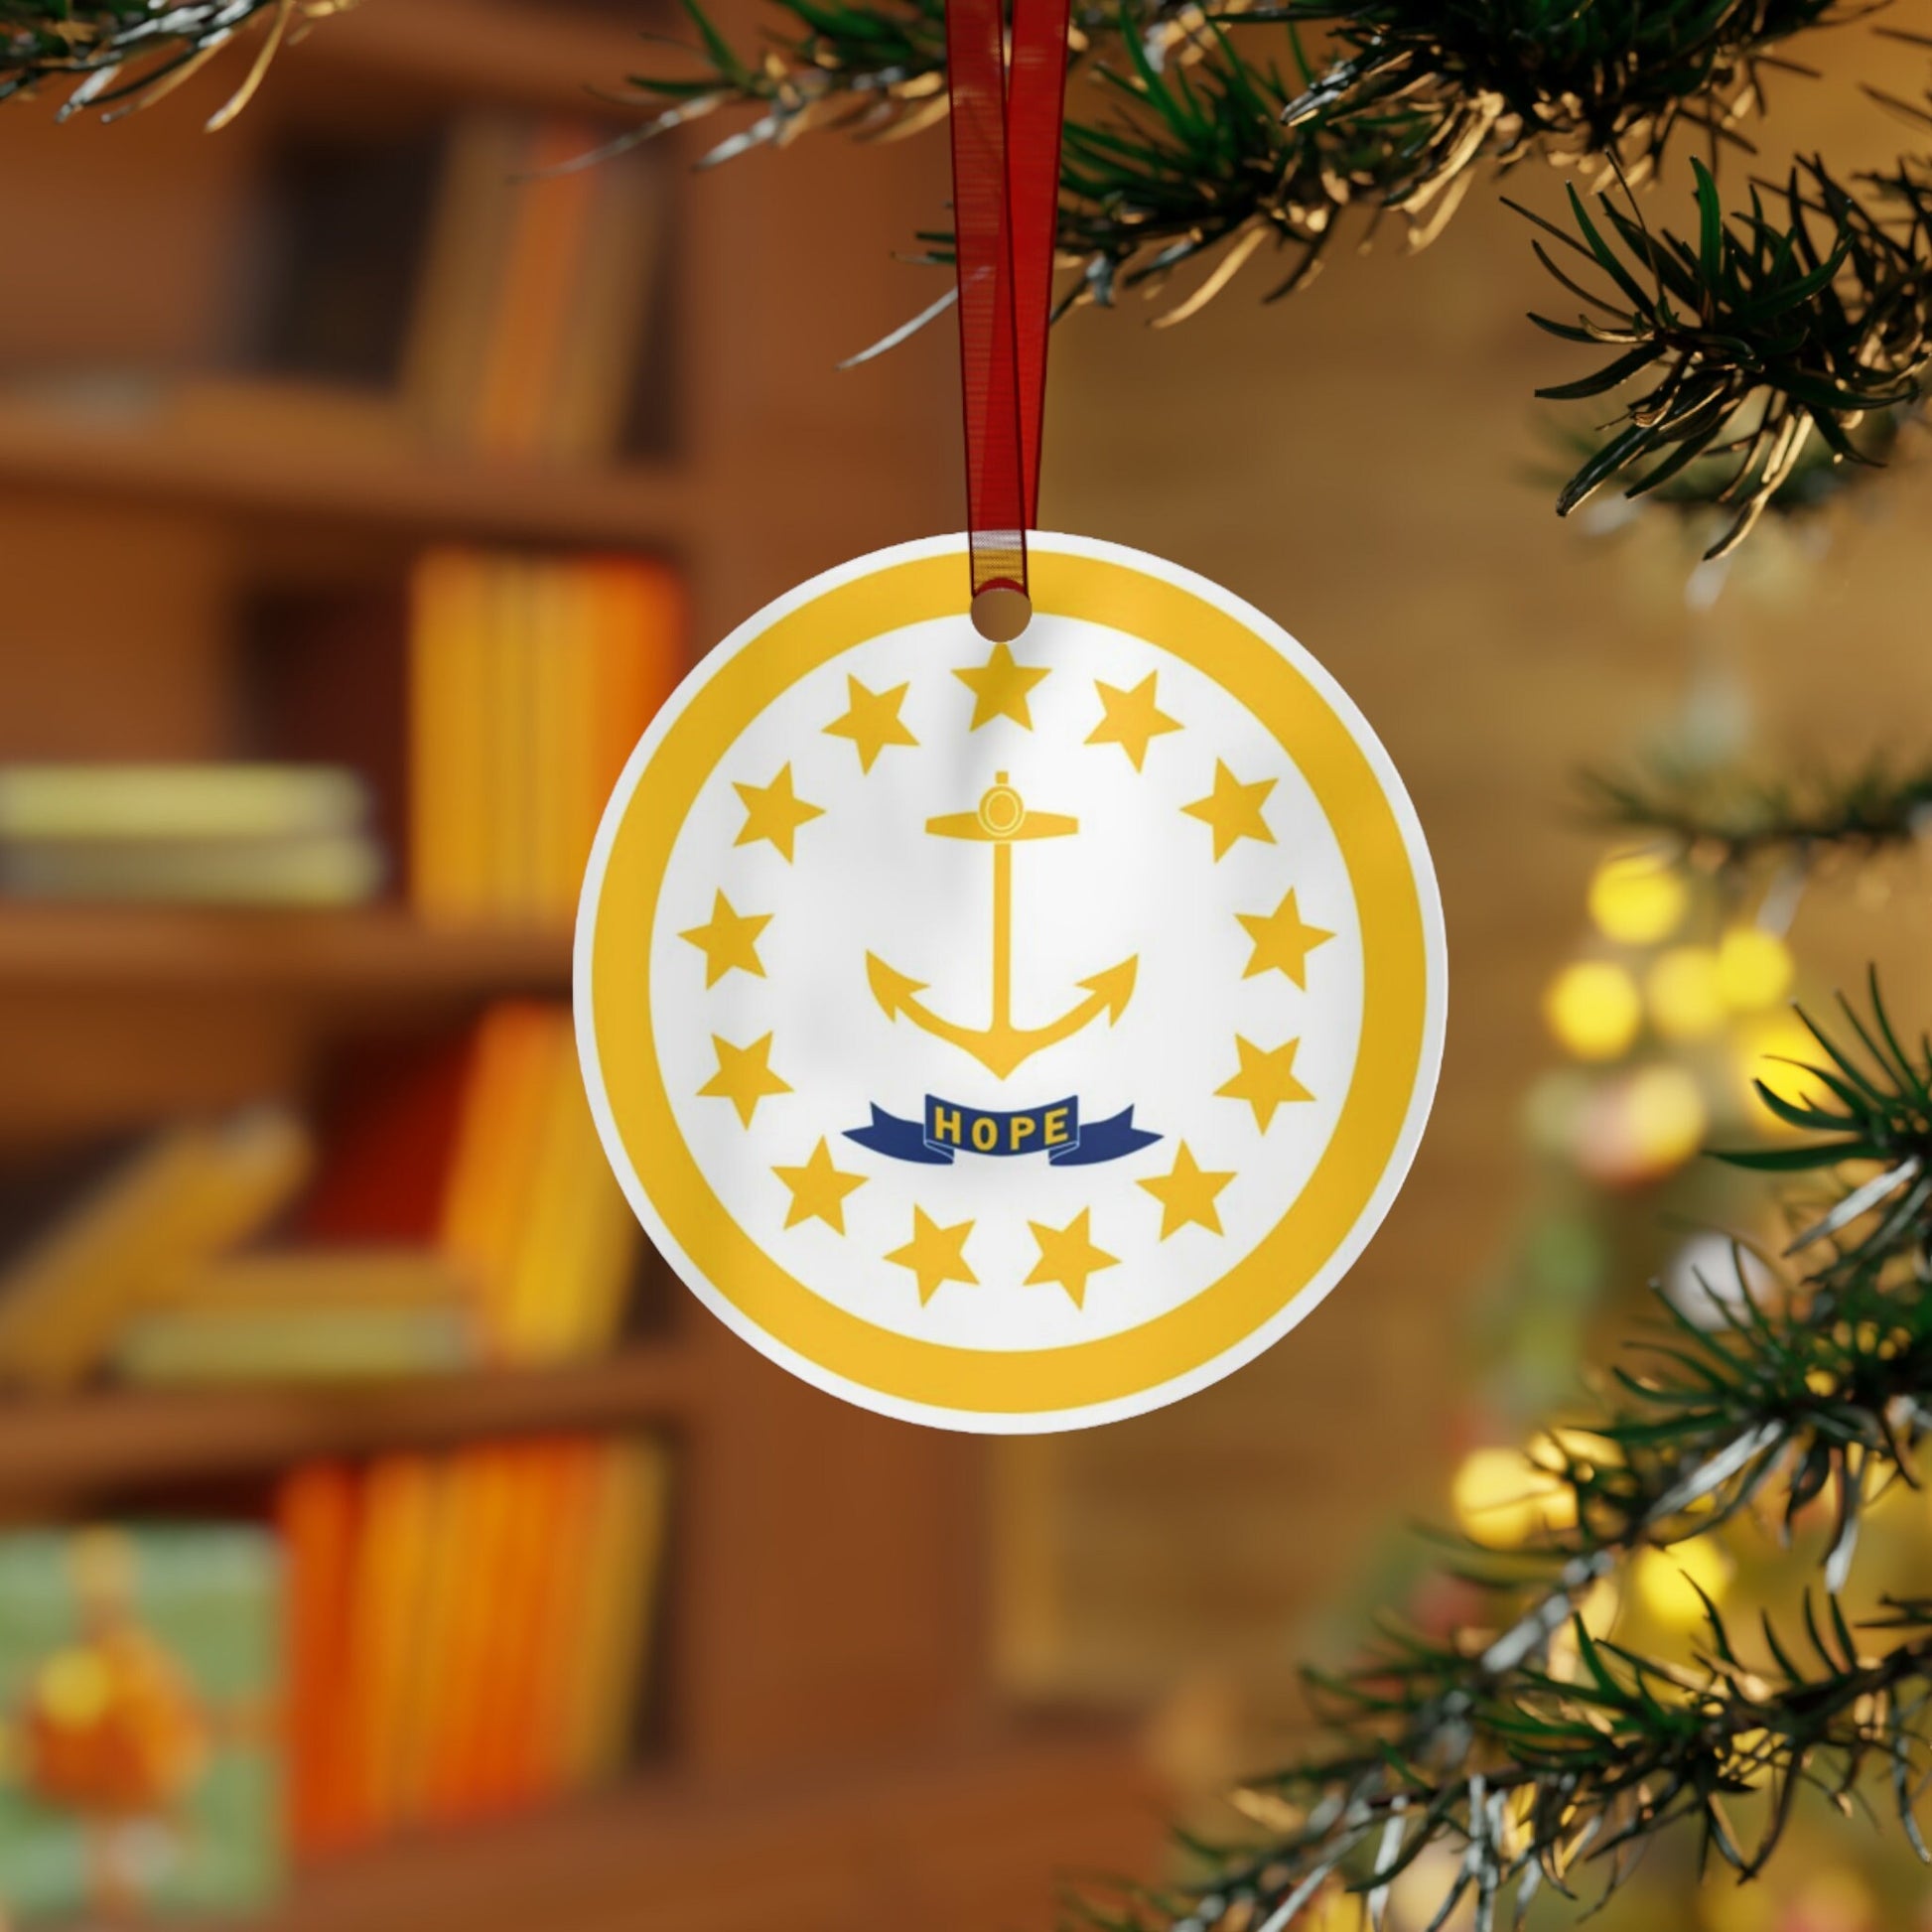 Rhode Island state flag gift Metal Ornament, Christmas gift, ornament exchange, care package gift, housewarming gift